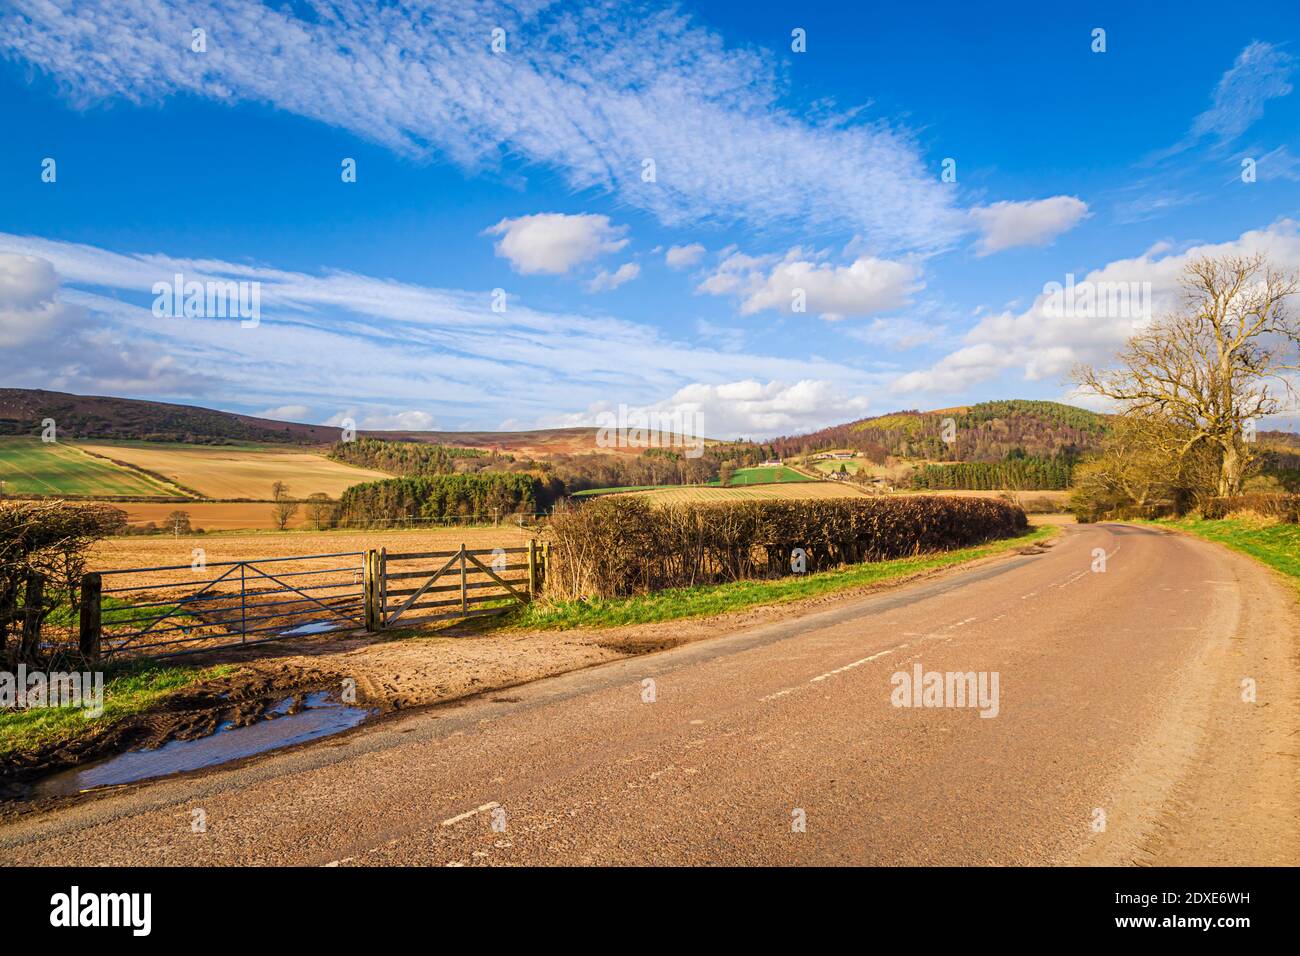 Empty country road in rural landscape on sunny day Stock Photo